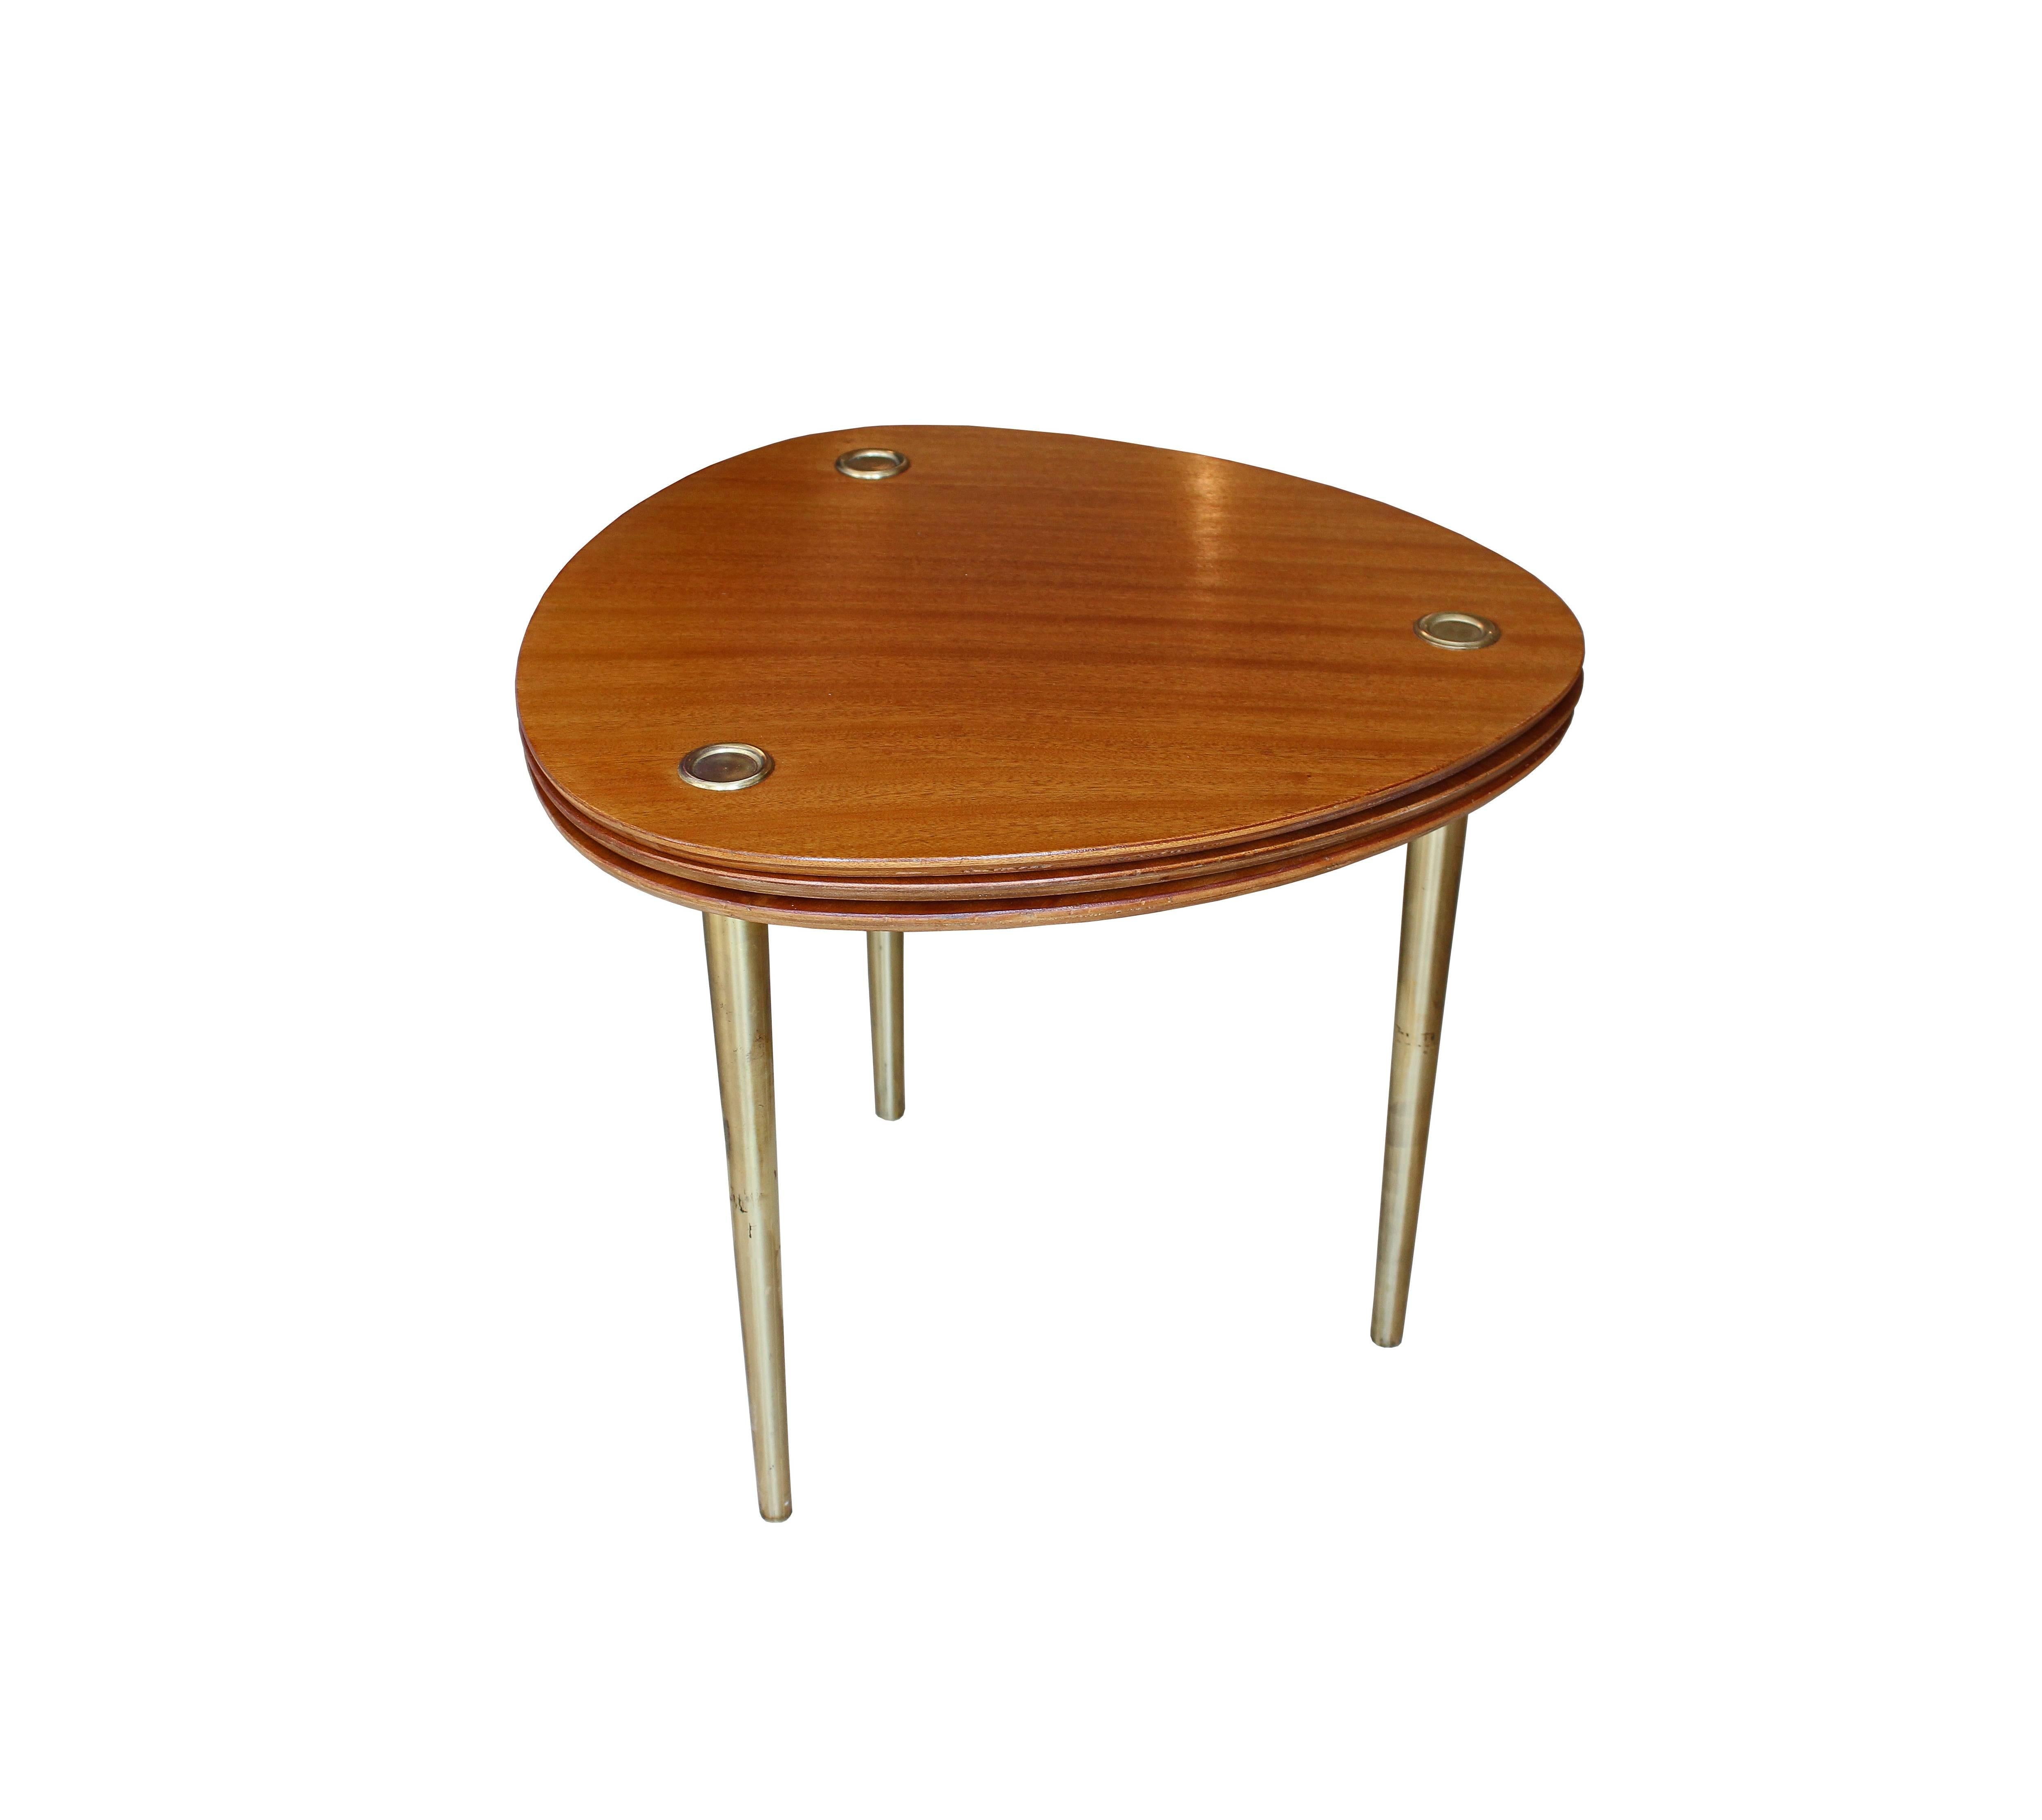 Set of three table in mahogany with tapering brass legs. These tables fit into each other for use as a single table or can be used as three separate units.